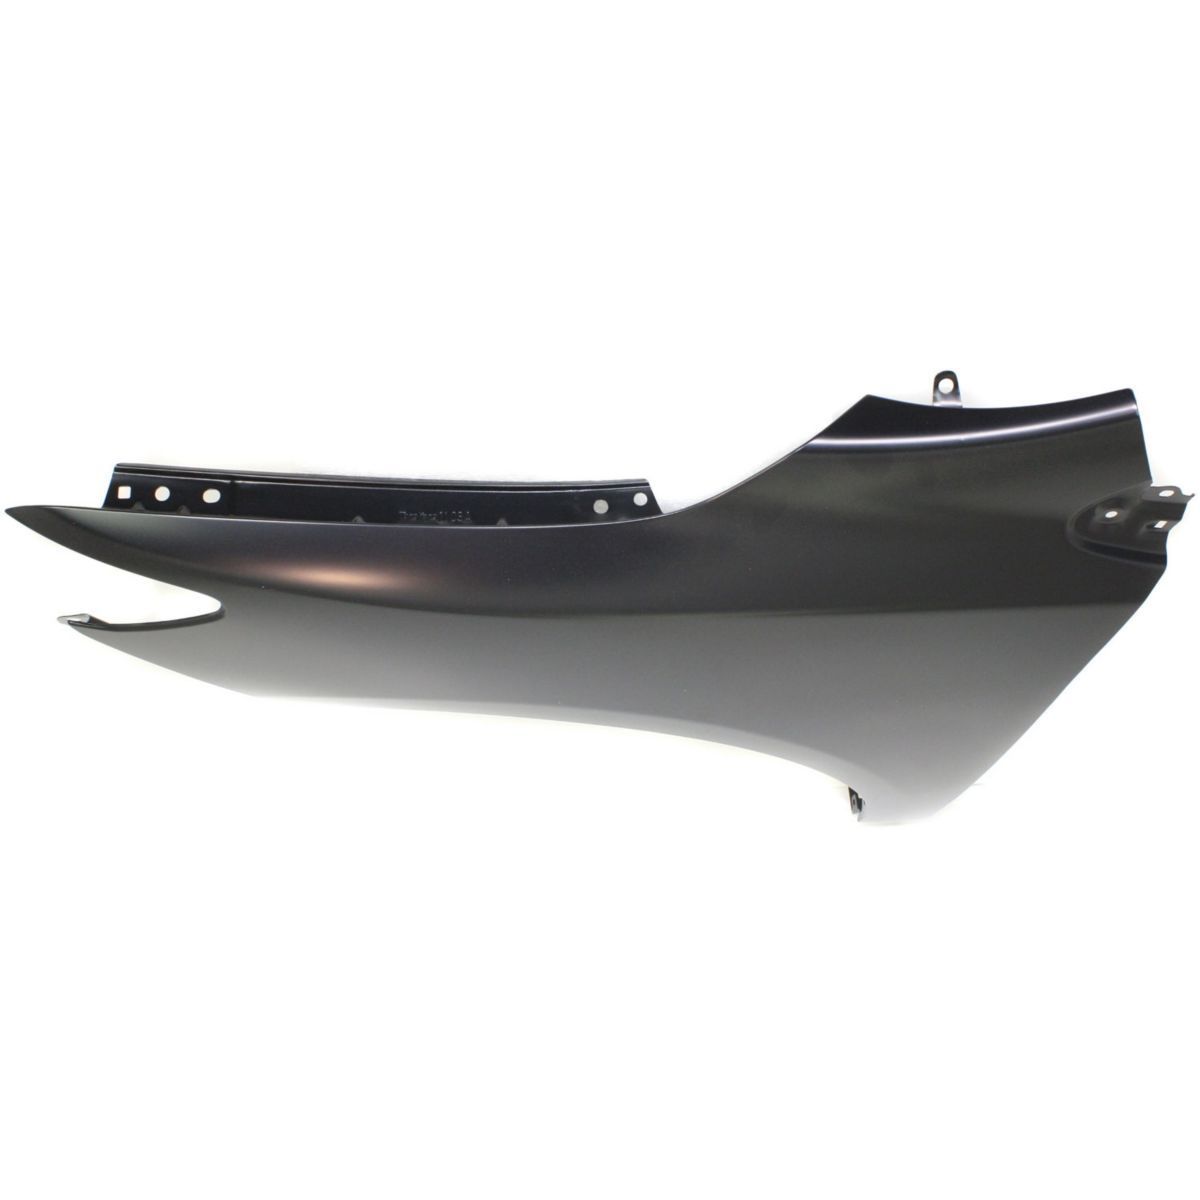 Toyota Corolla 2009 - 2013 Driver Side Fender 09 - 13 TO1240224 Bumper-King